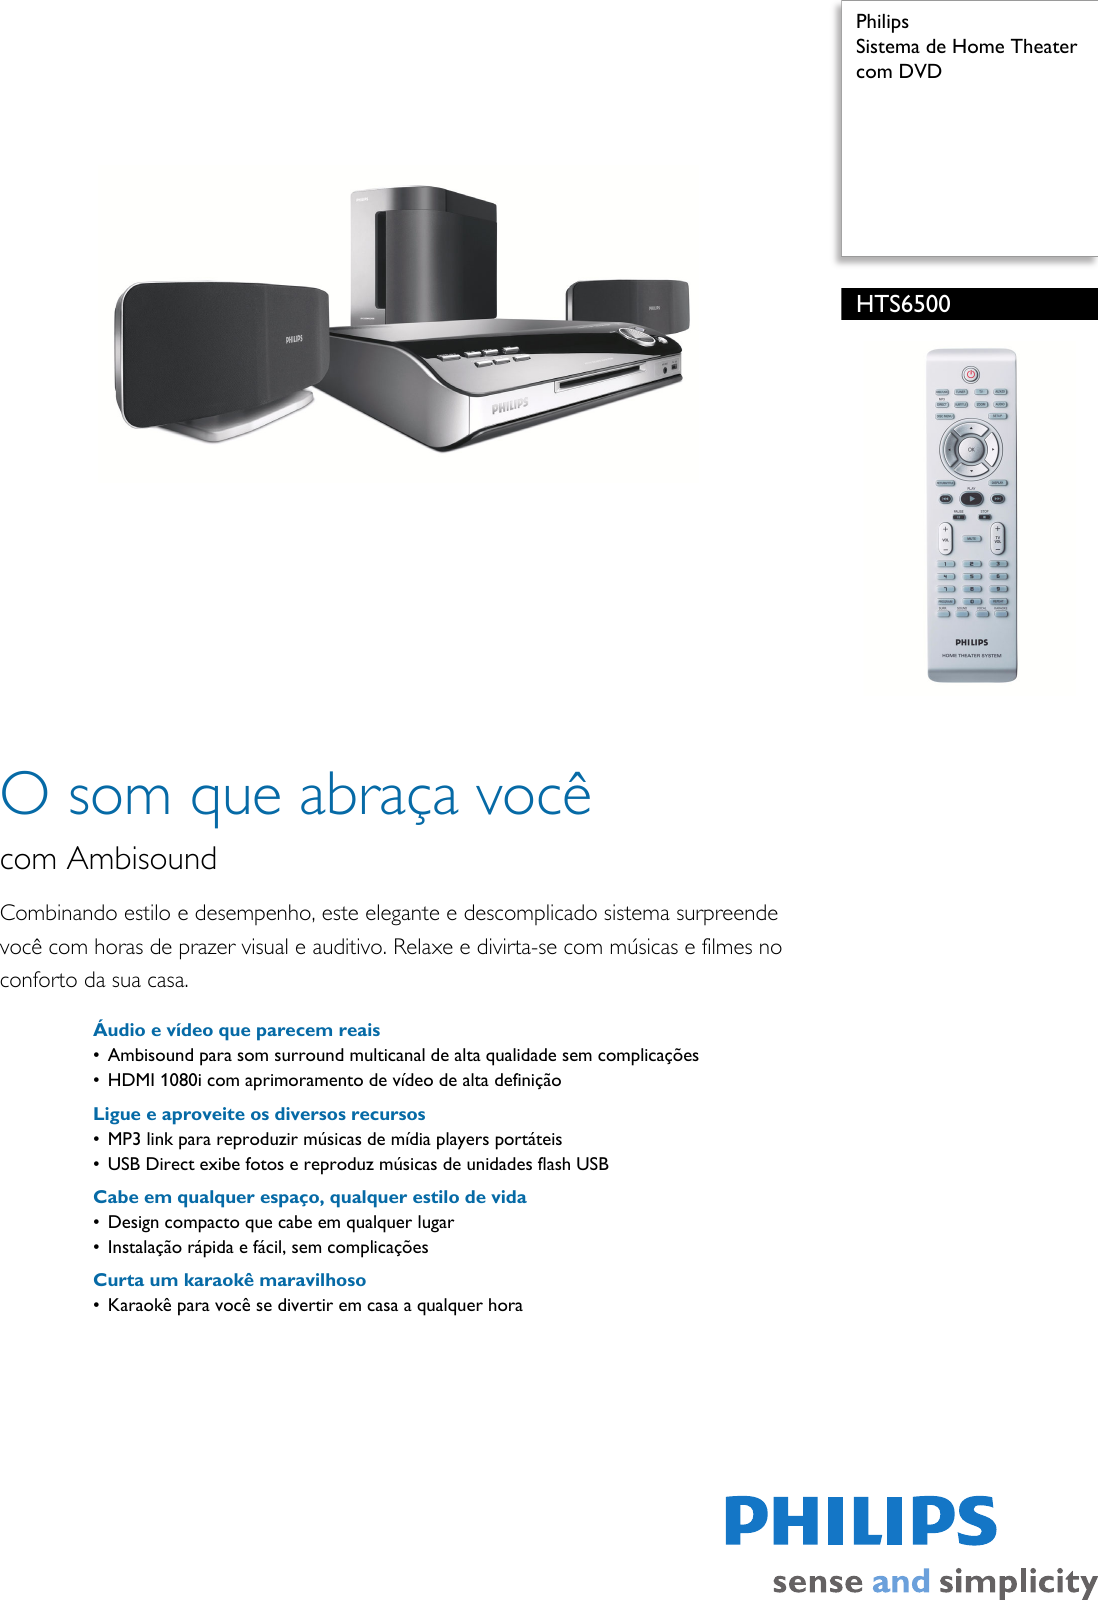 Page 1 of 3 - Philips HTS6500/55 Sistema De Home Theater Com DVD Hts6500 55 Pss Brpbr